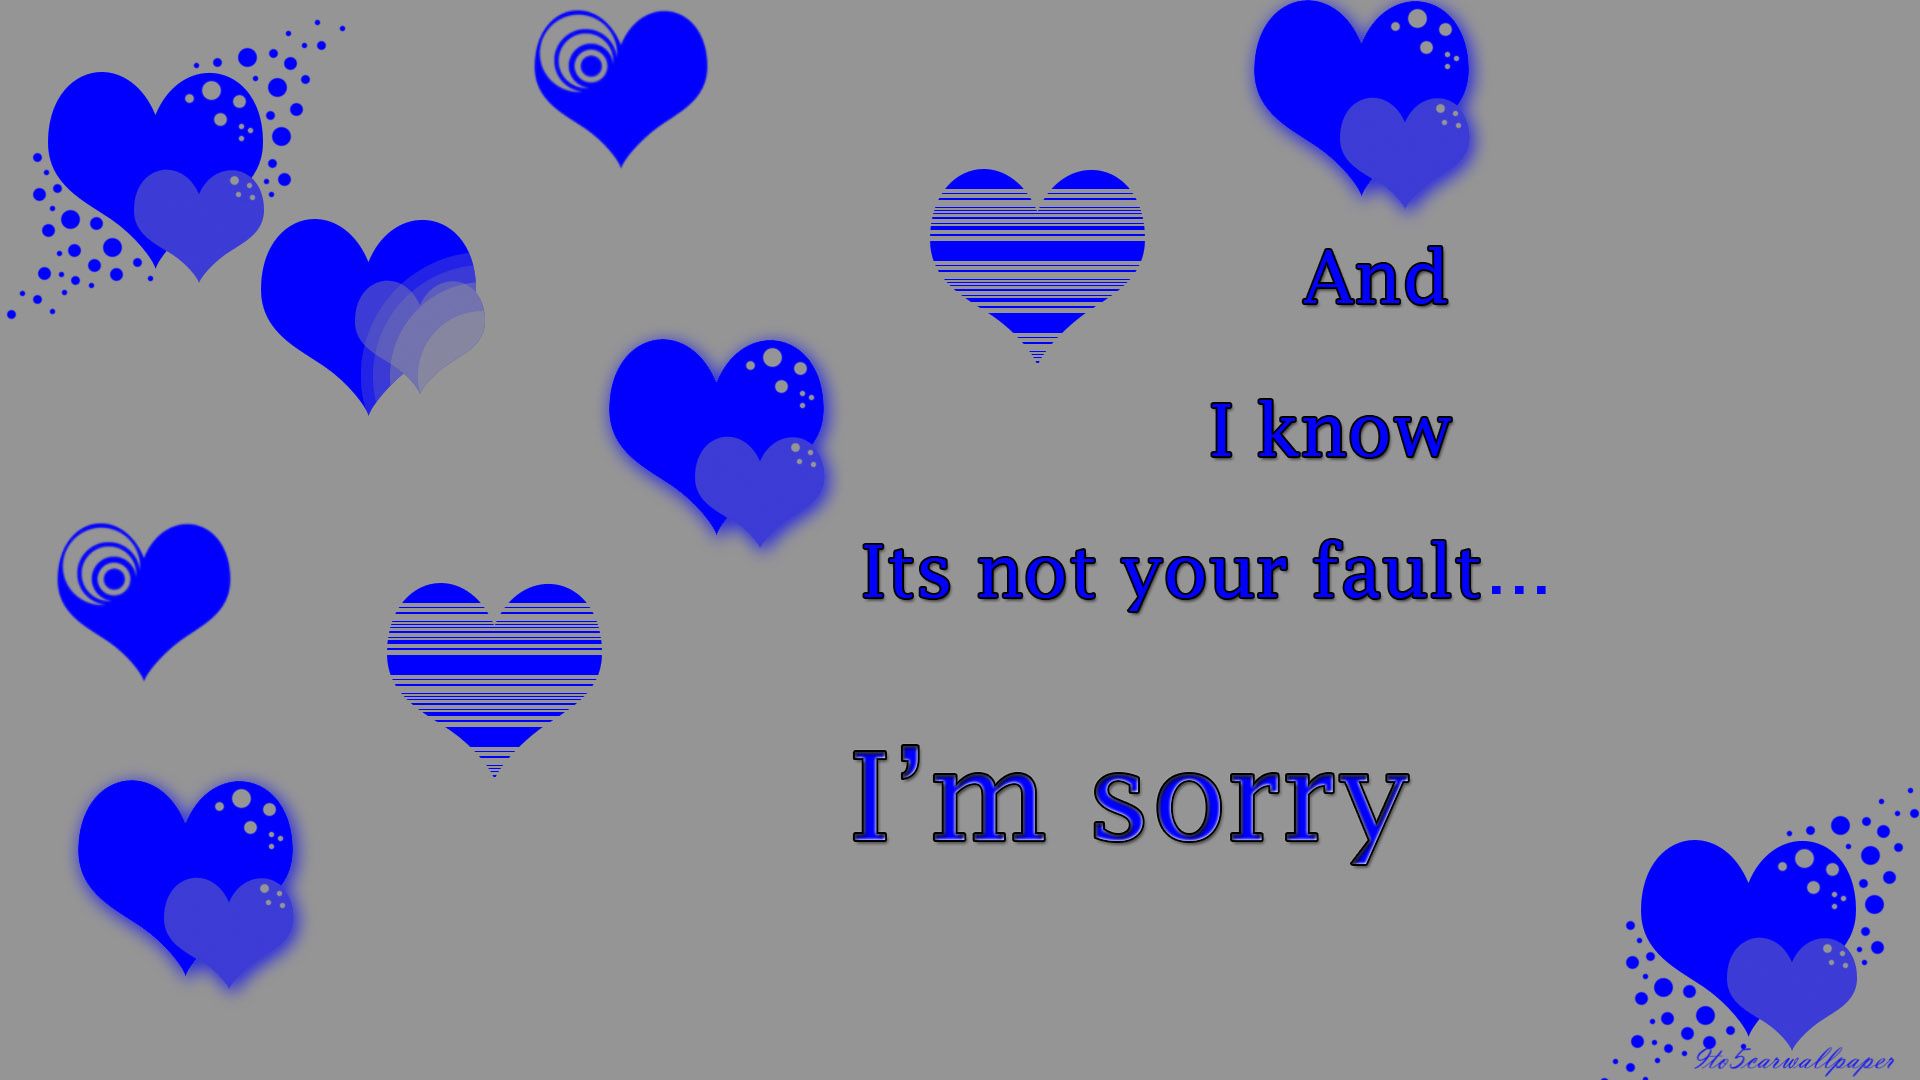 Latest I Am Sorry Image, Quotes & Hd Wallpapers